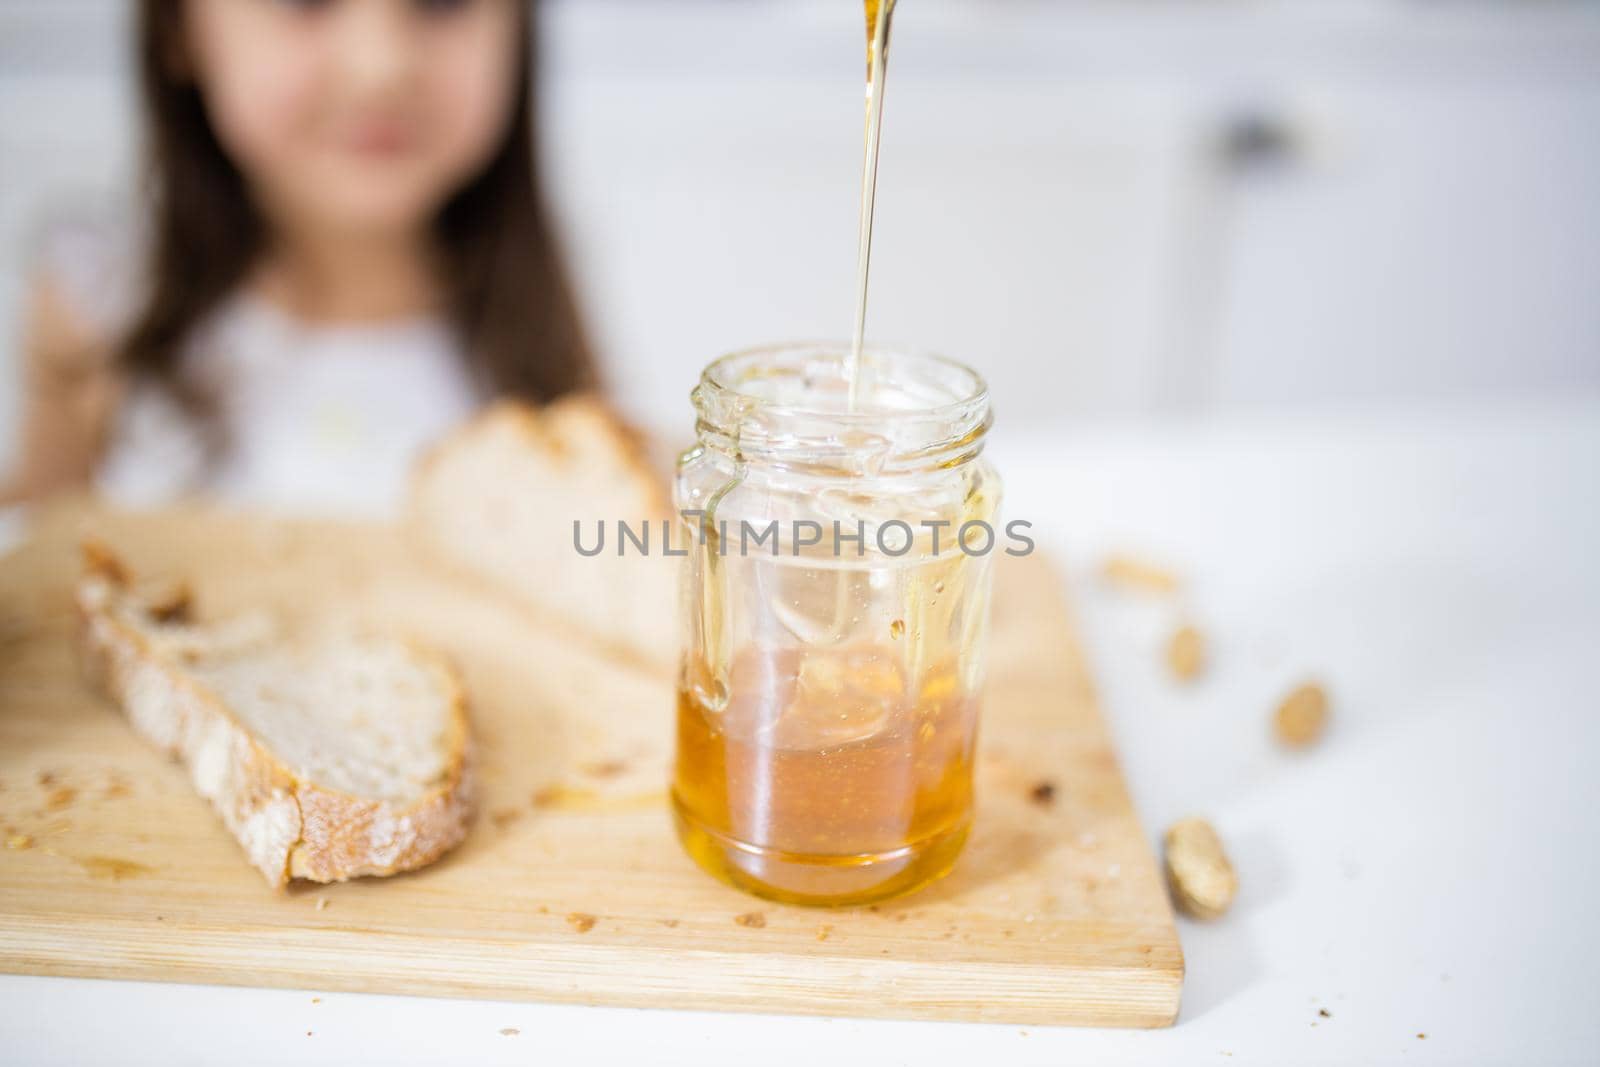 Picking honey from jar next to a slice of bread above wooden cutting board. Young girl at white table watching a honey jar.Sweet and light breakfast